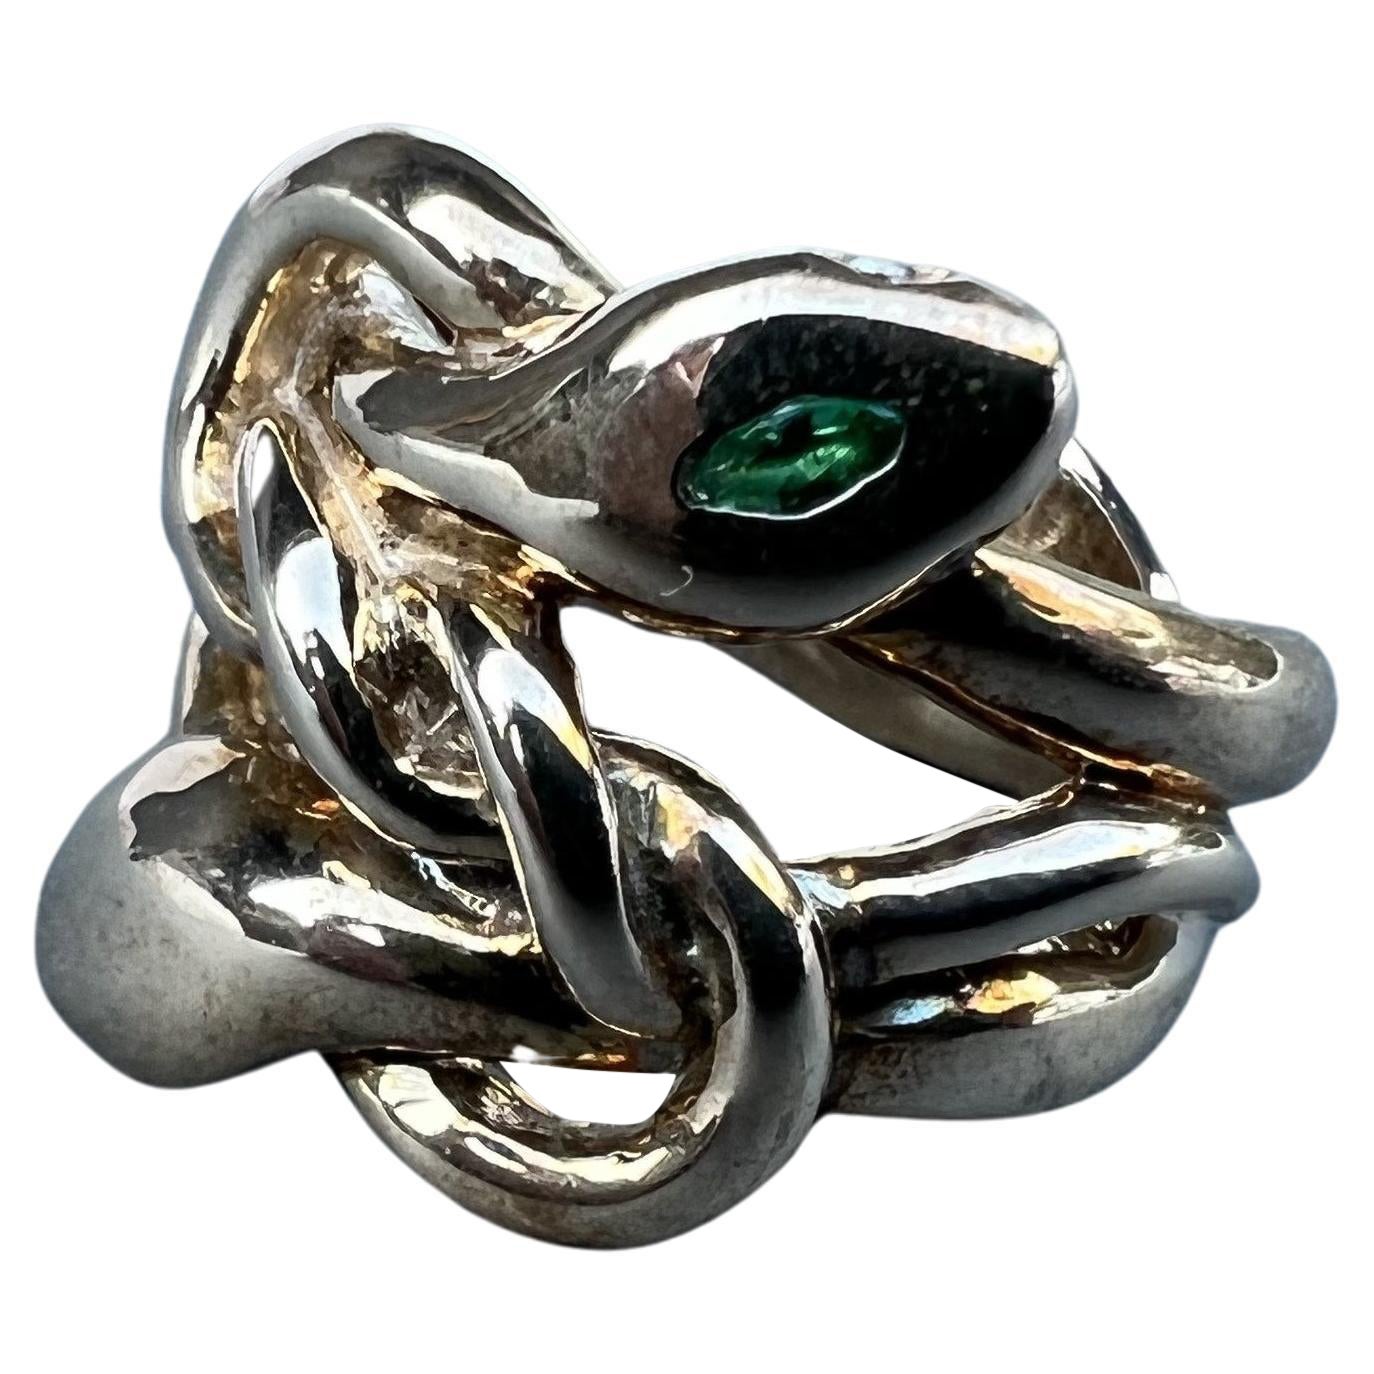 What does a silver snake ring mean?